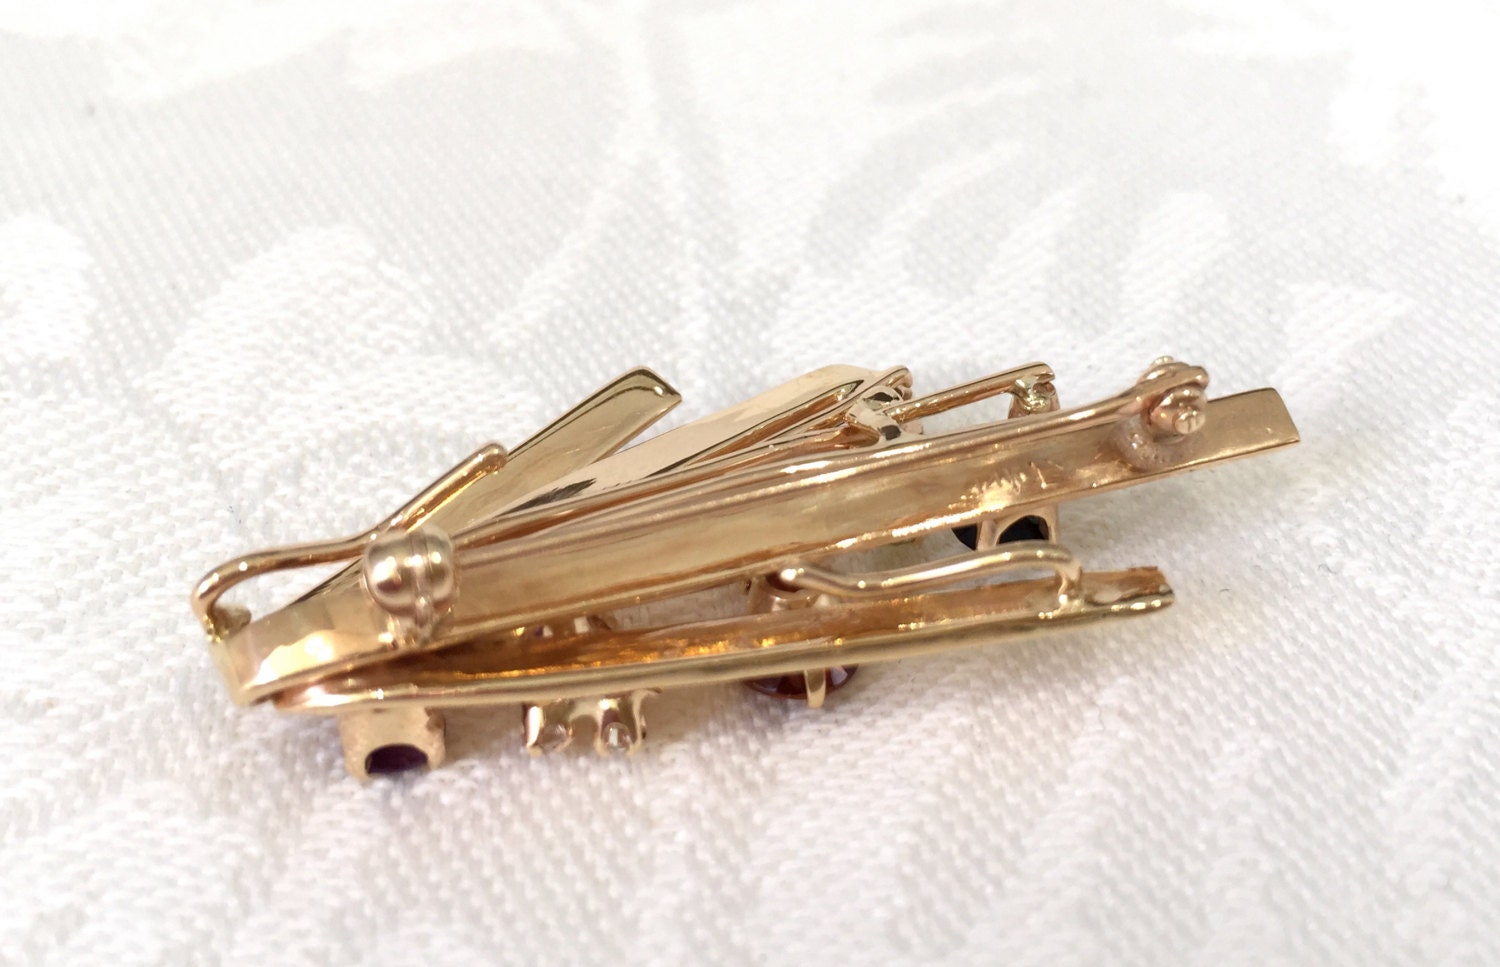 Diamond and Gemstone Free Form Brooch Yellow Gold Hand Made - Etsy